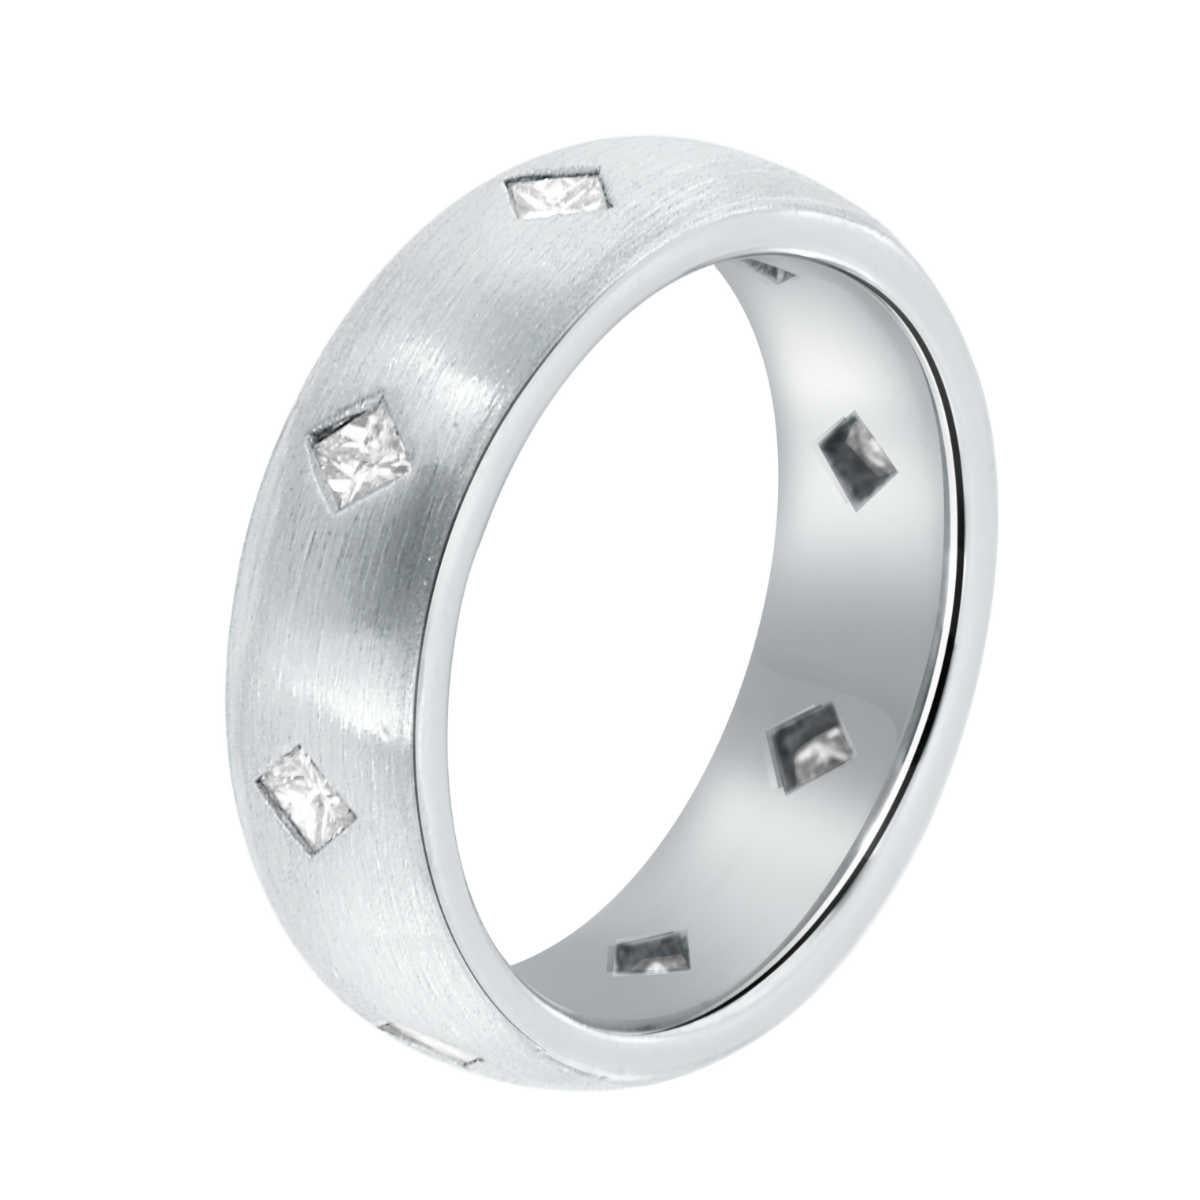 This Platinum handcrafted eternity unisex band showcases eight (8) perfectly matched Princess cut diamonds evenly placed on a six-and-a-half (6.5) MM wide band. The band is in a satin finish and comfort fit.

Diamond Weight : 0.72 Carats
Diamond